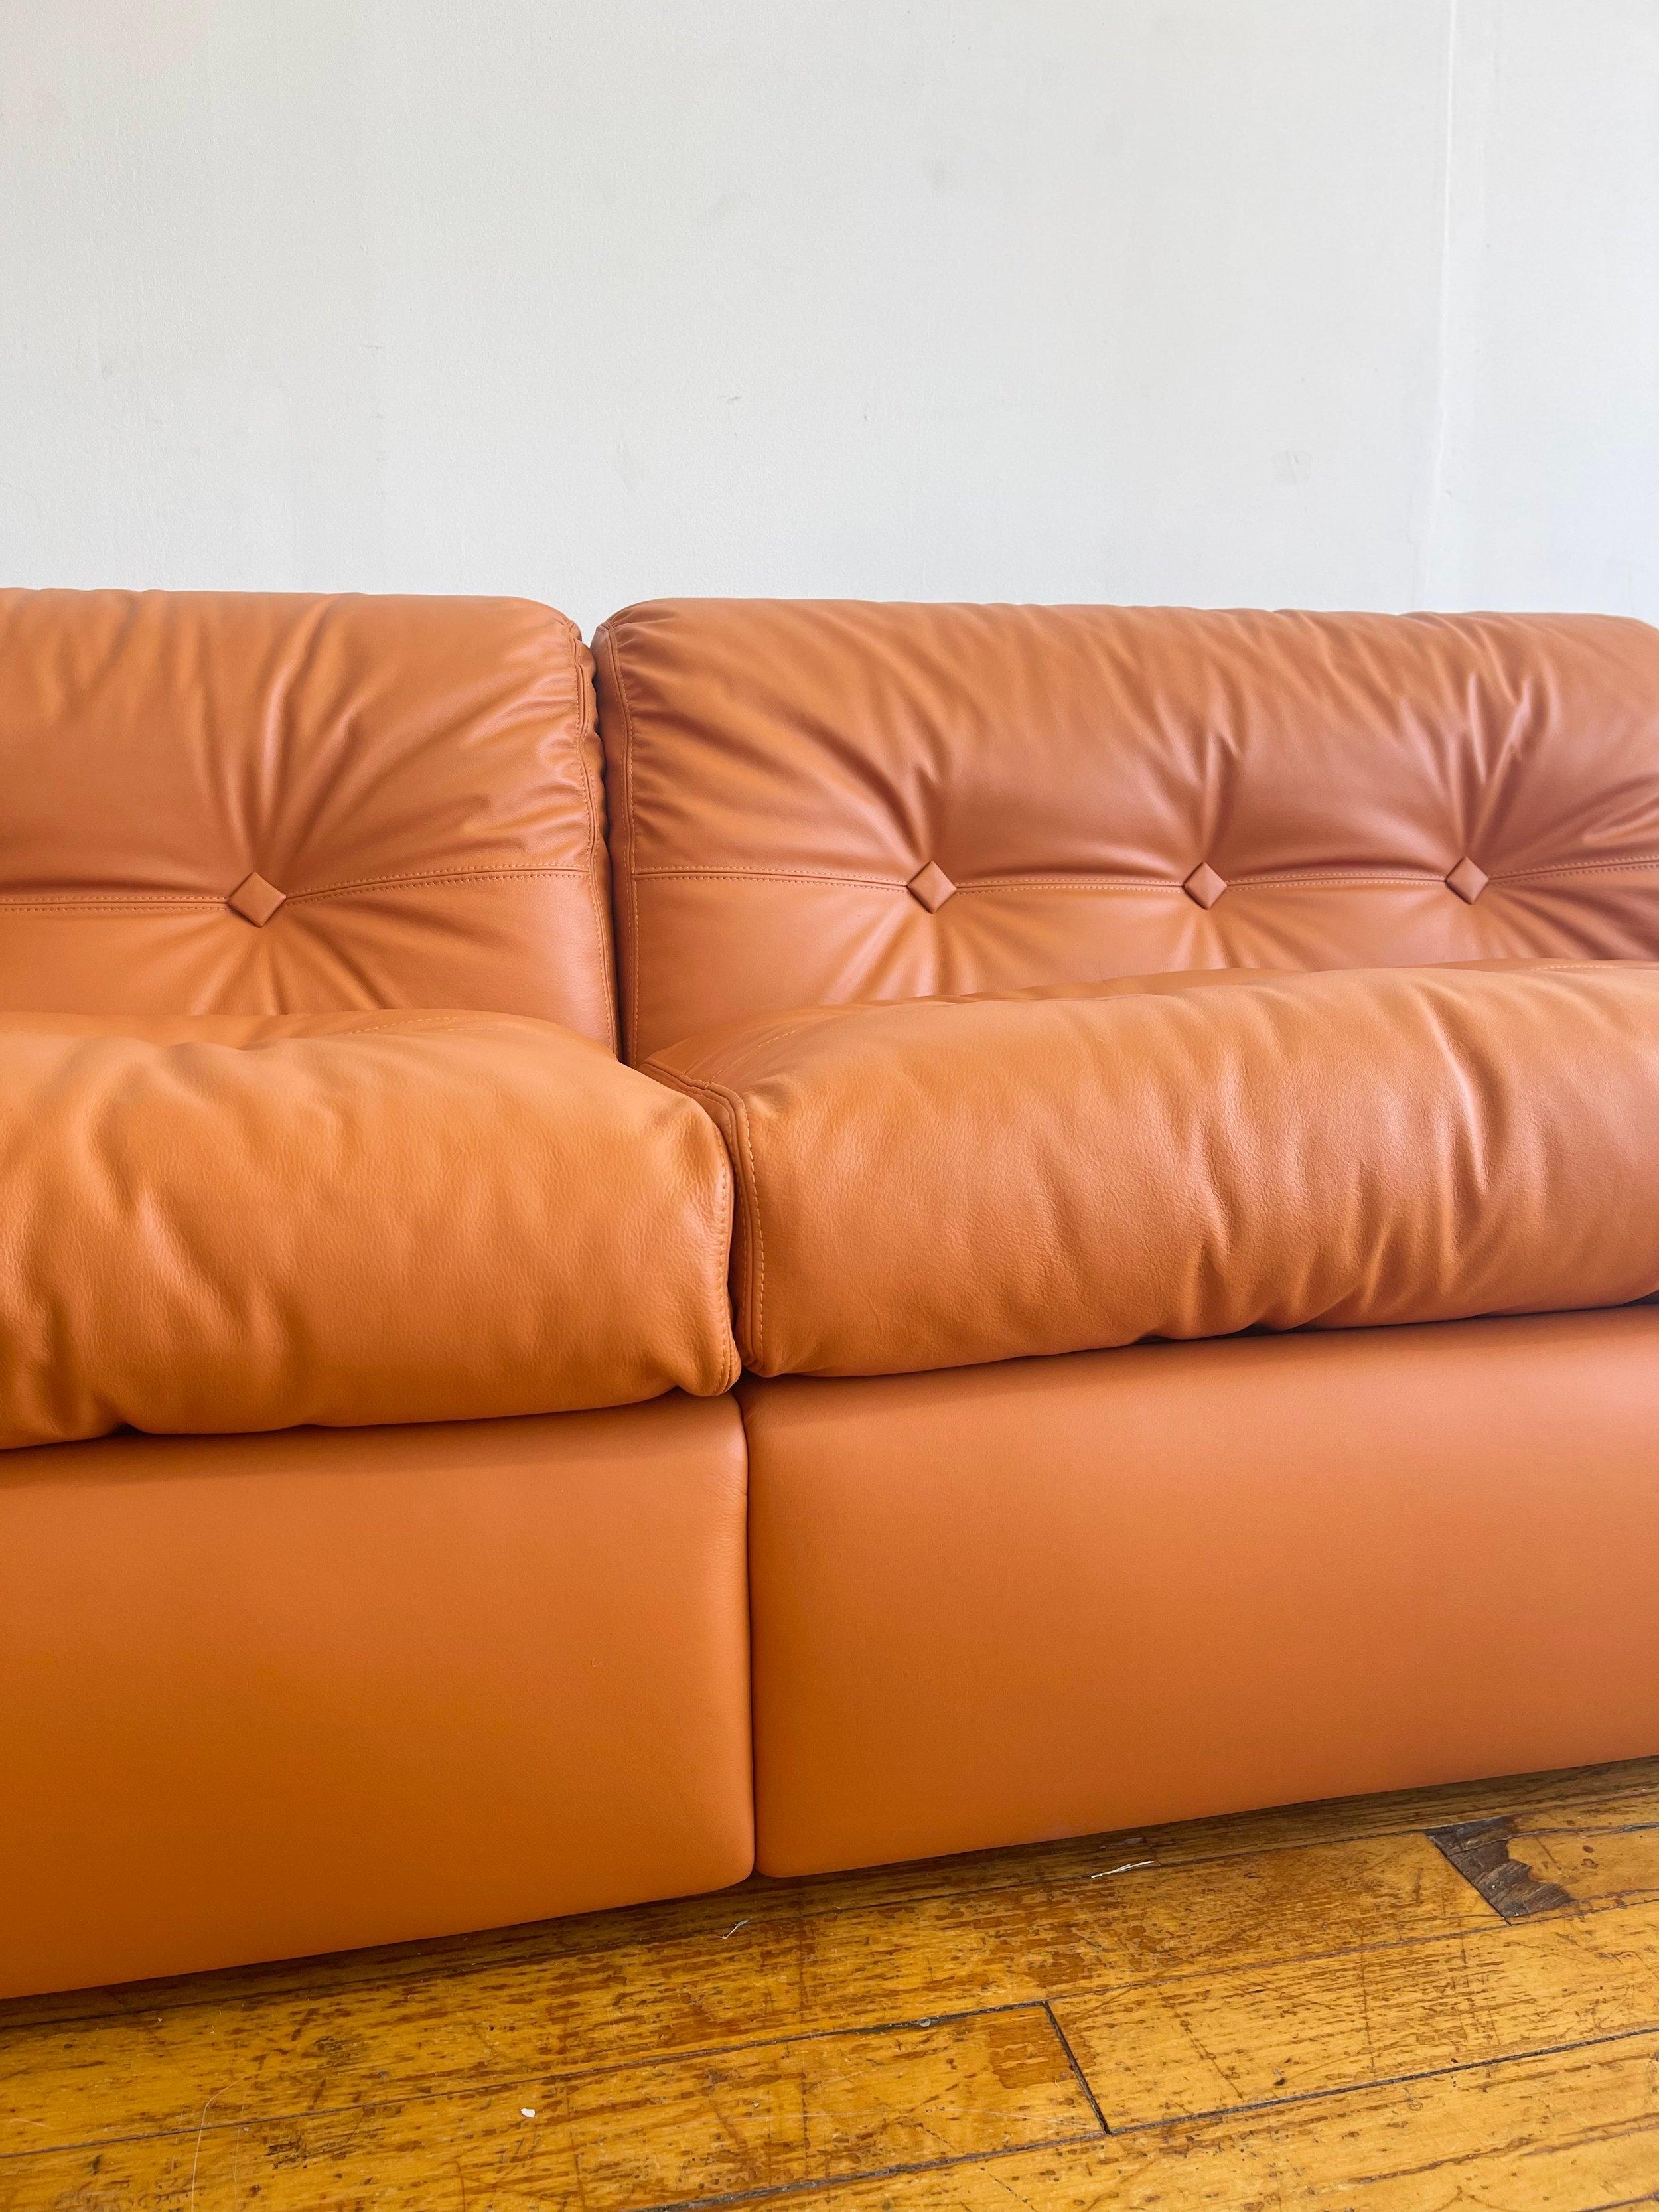 Adriano Piazzesi 1970s Sofa Newly Upholstered with Copper Brown Italian Leather For Sale 10